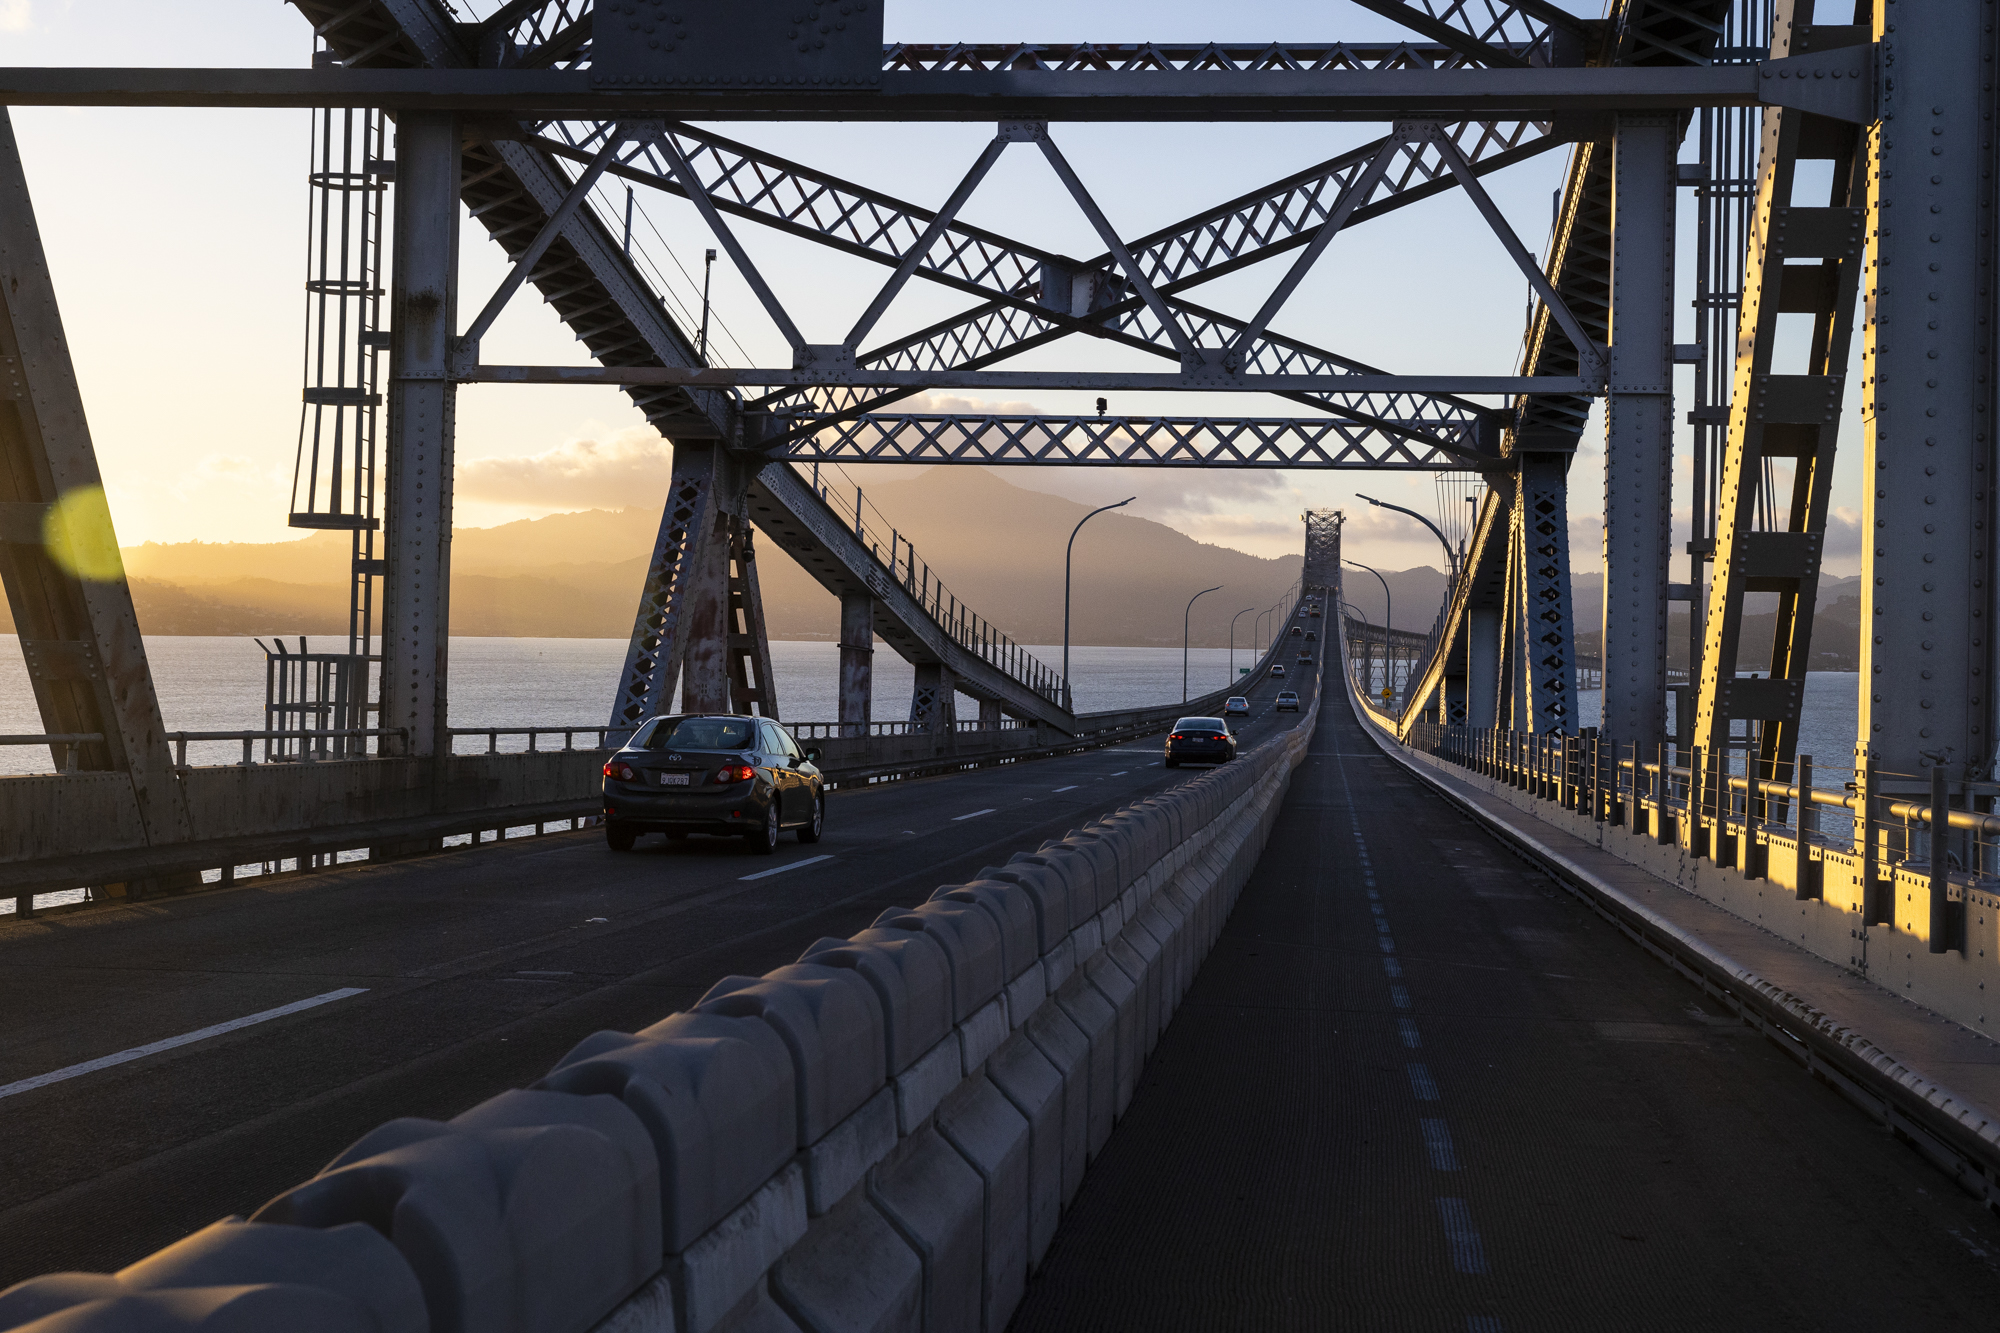 A bike lane on a large bridge on which cars are also driving.